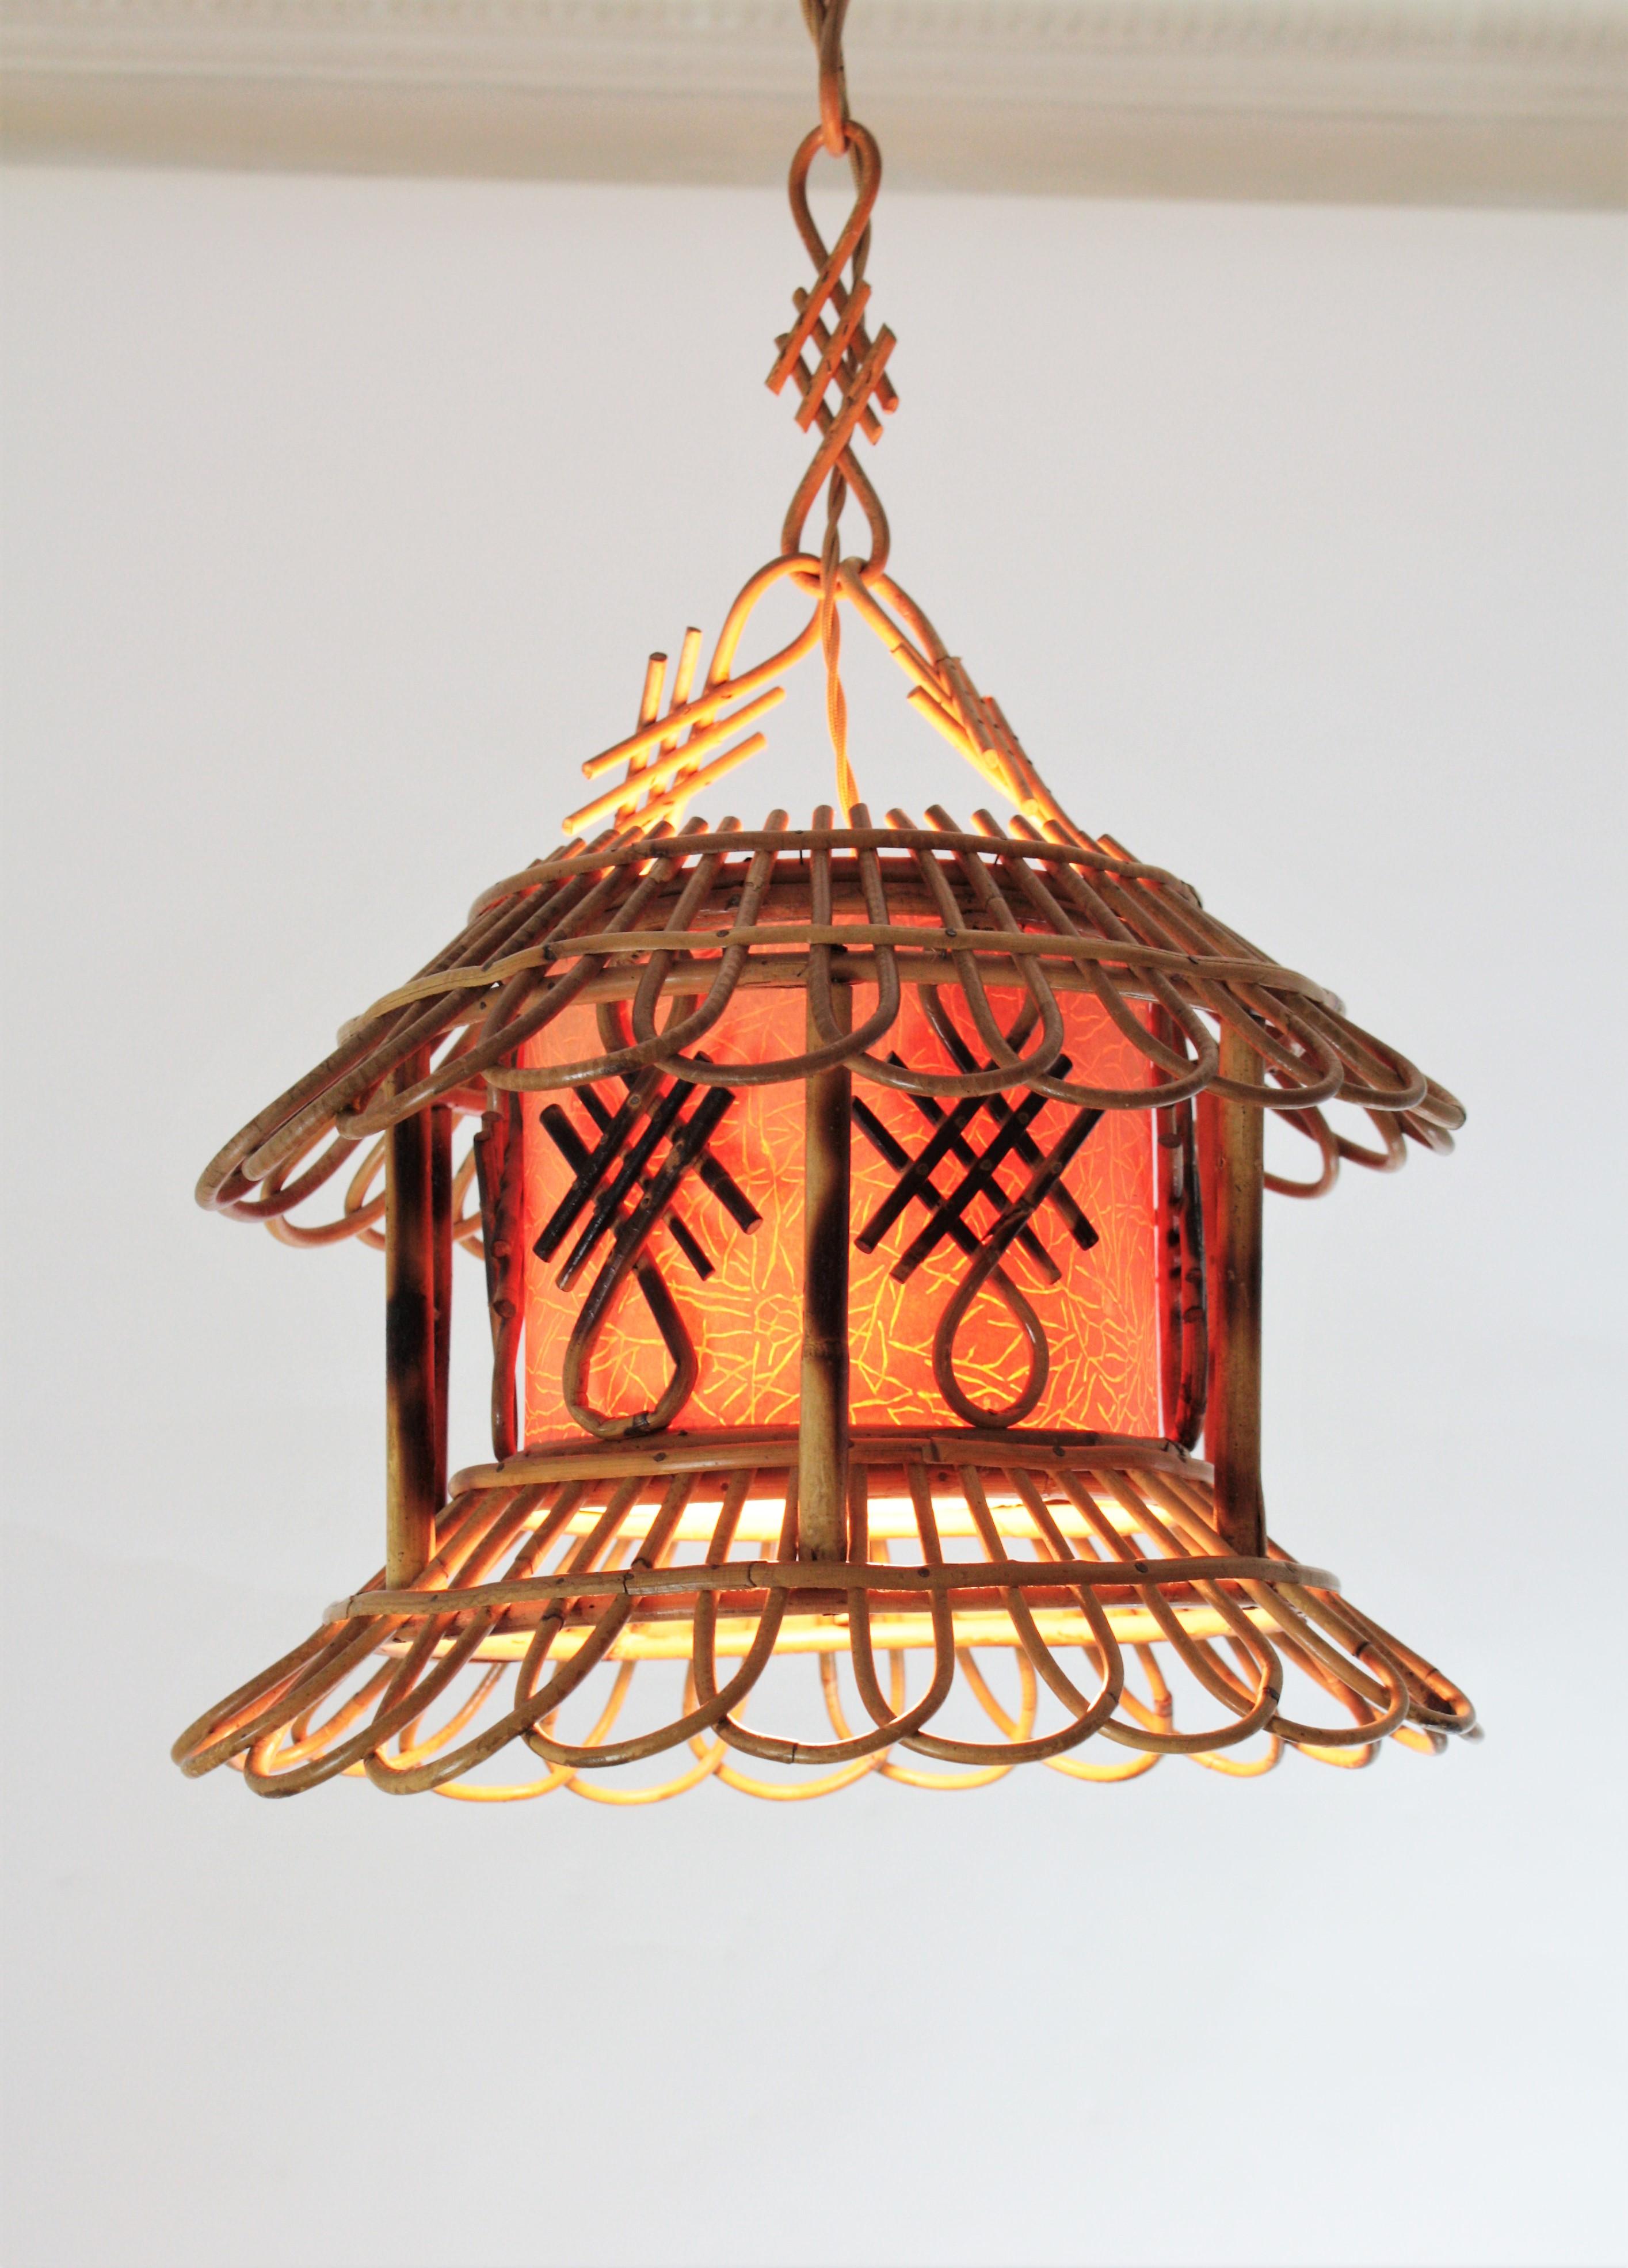 One of a kind chinoiserie style handcrafted bamboo and Rattan Pagoda shape pendant lamp with a paper shade, France, 1950s.
This rattan chandelier features a pagoda shape rattan hanging lamp with an interior paper shade. It hangs from a chain made of